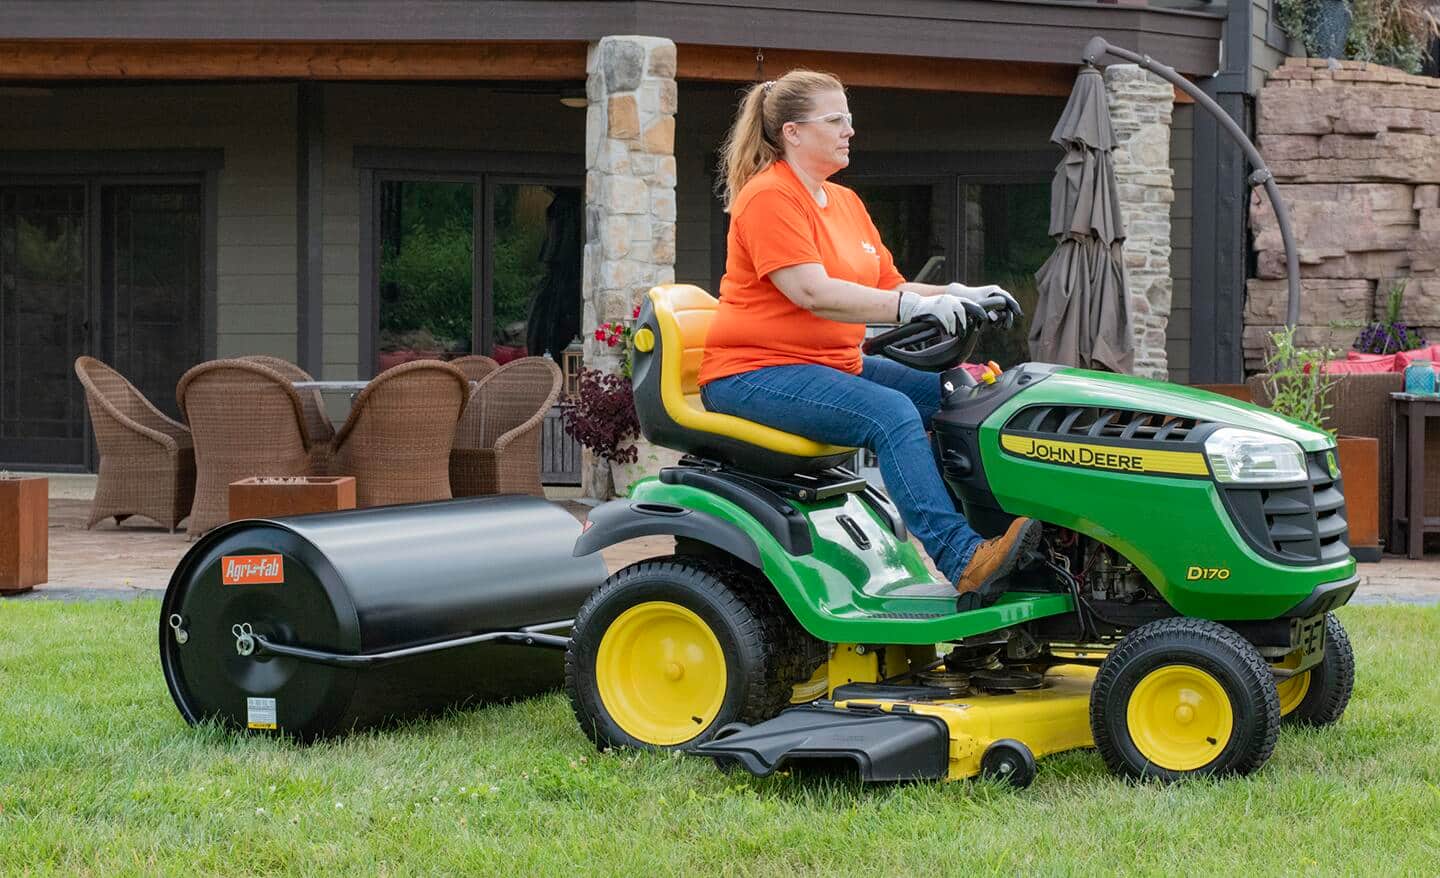 A woman riding a lawn mower with an attachment that helps bag lawn clippings.